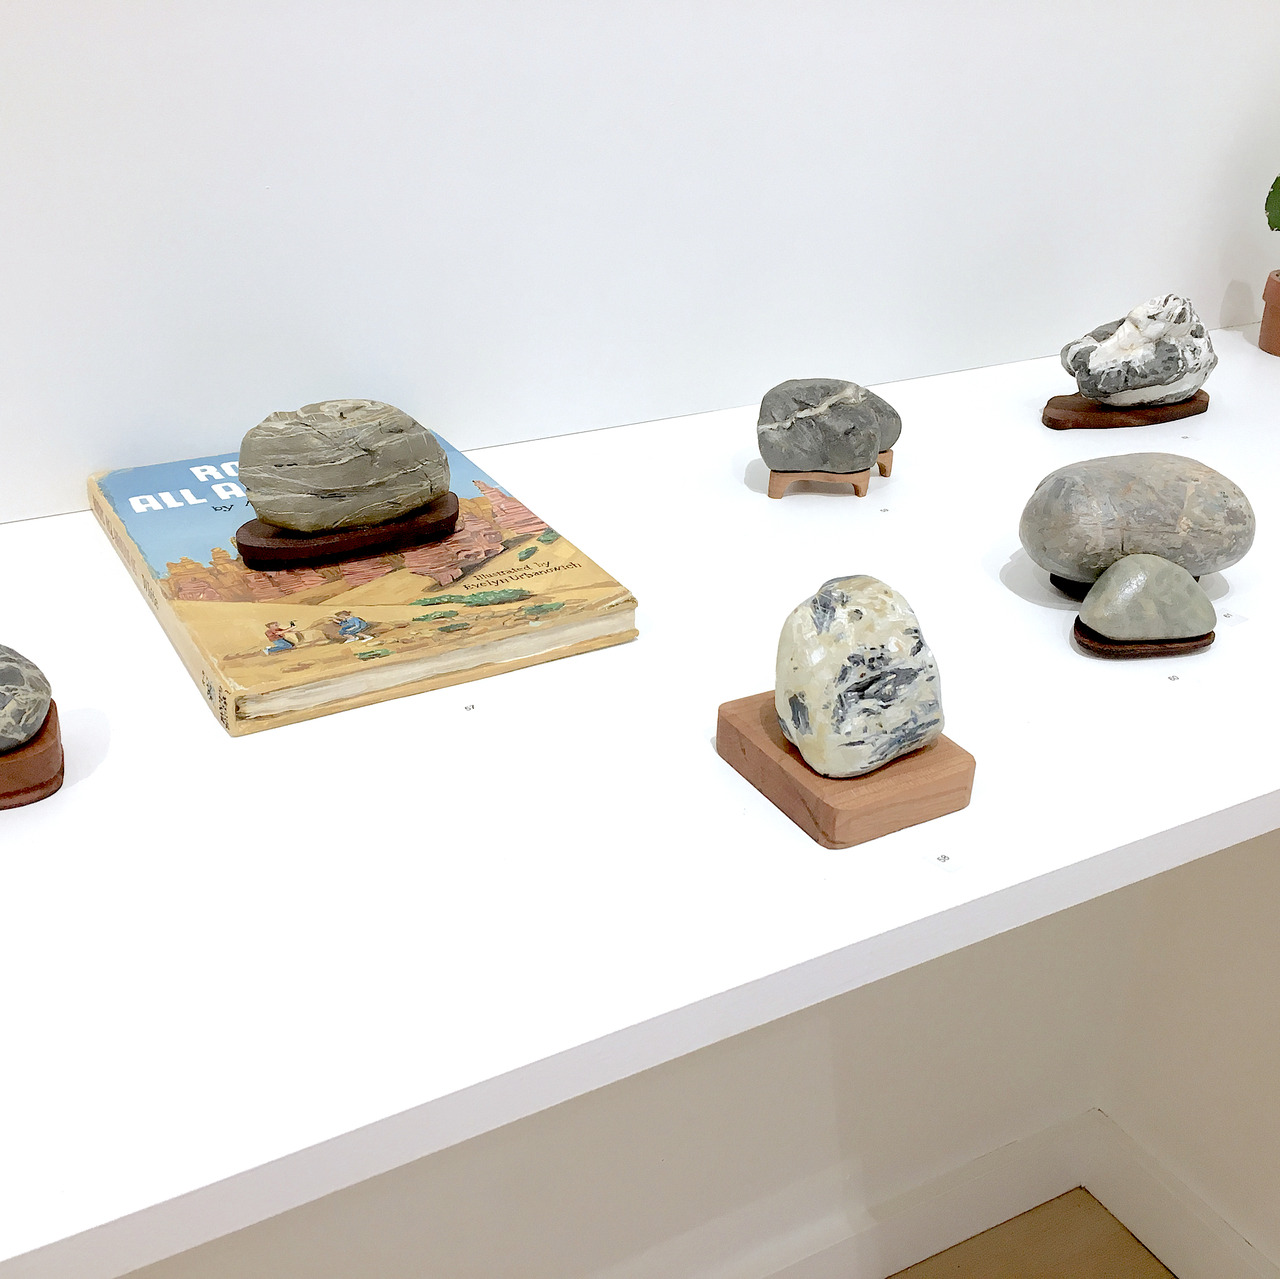 UNTITLED PROJECT: MOUNTAIN/ROCK SHOP, Oil paint on carved wood, 2019 >> Untitled Project: Mountain/Rock Shop is an investigation of a particular place through objects and images — in particular, hand-carved and painted rocks based on real rocks...